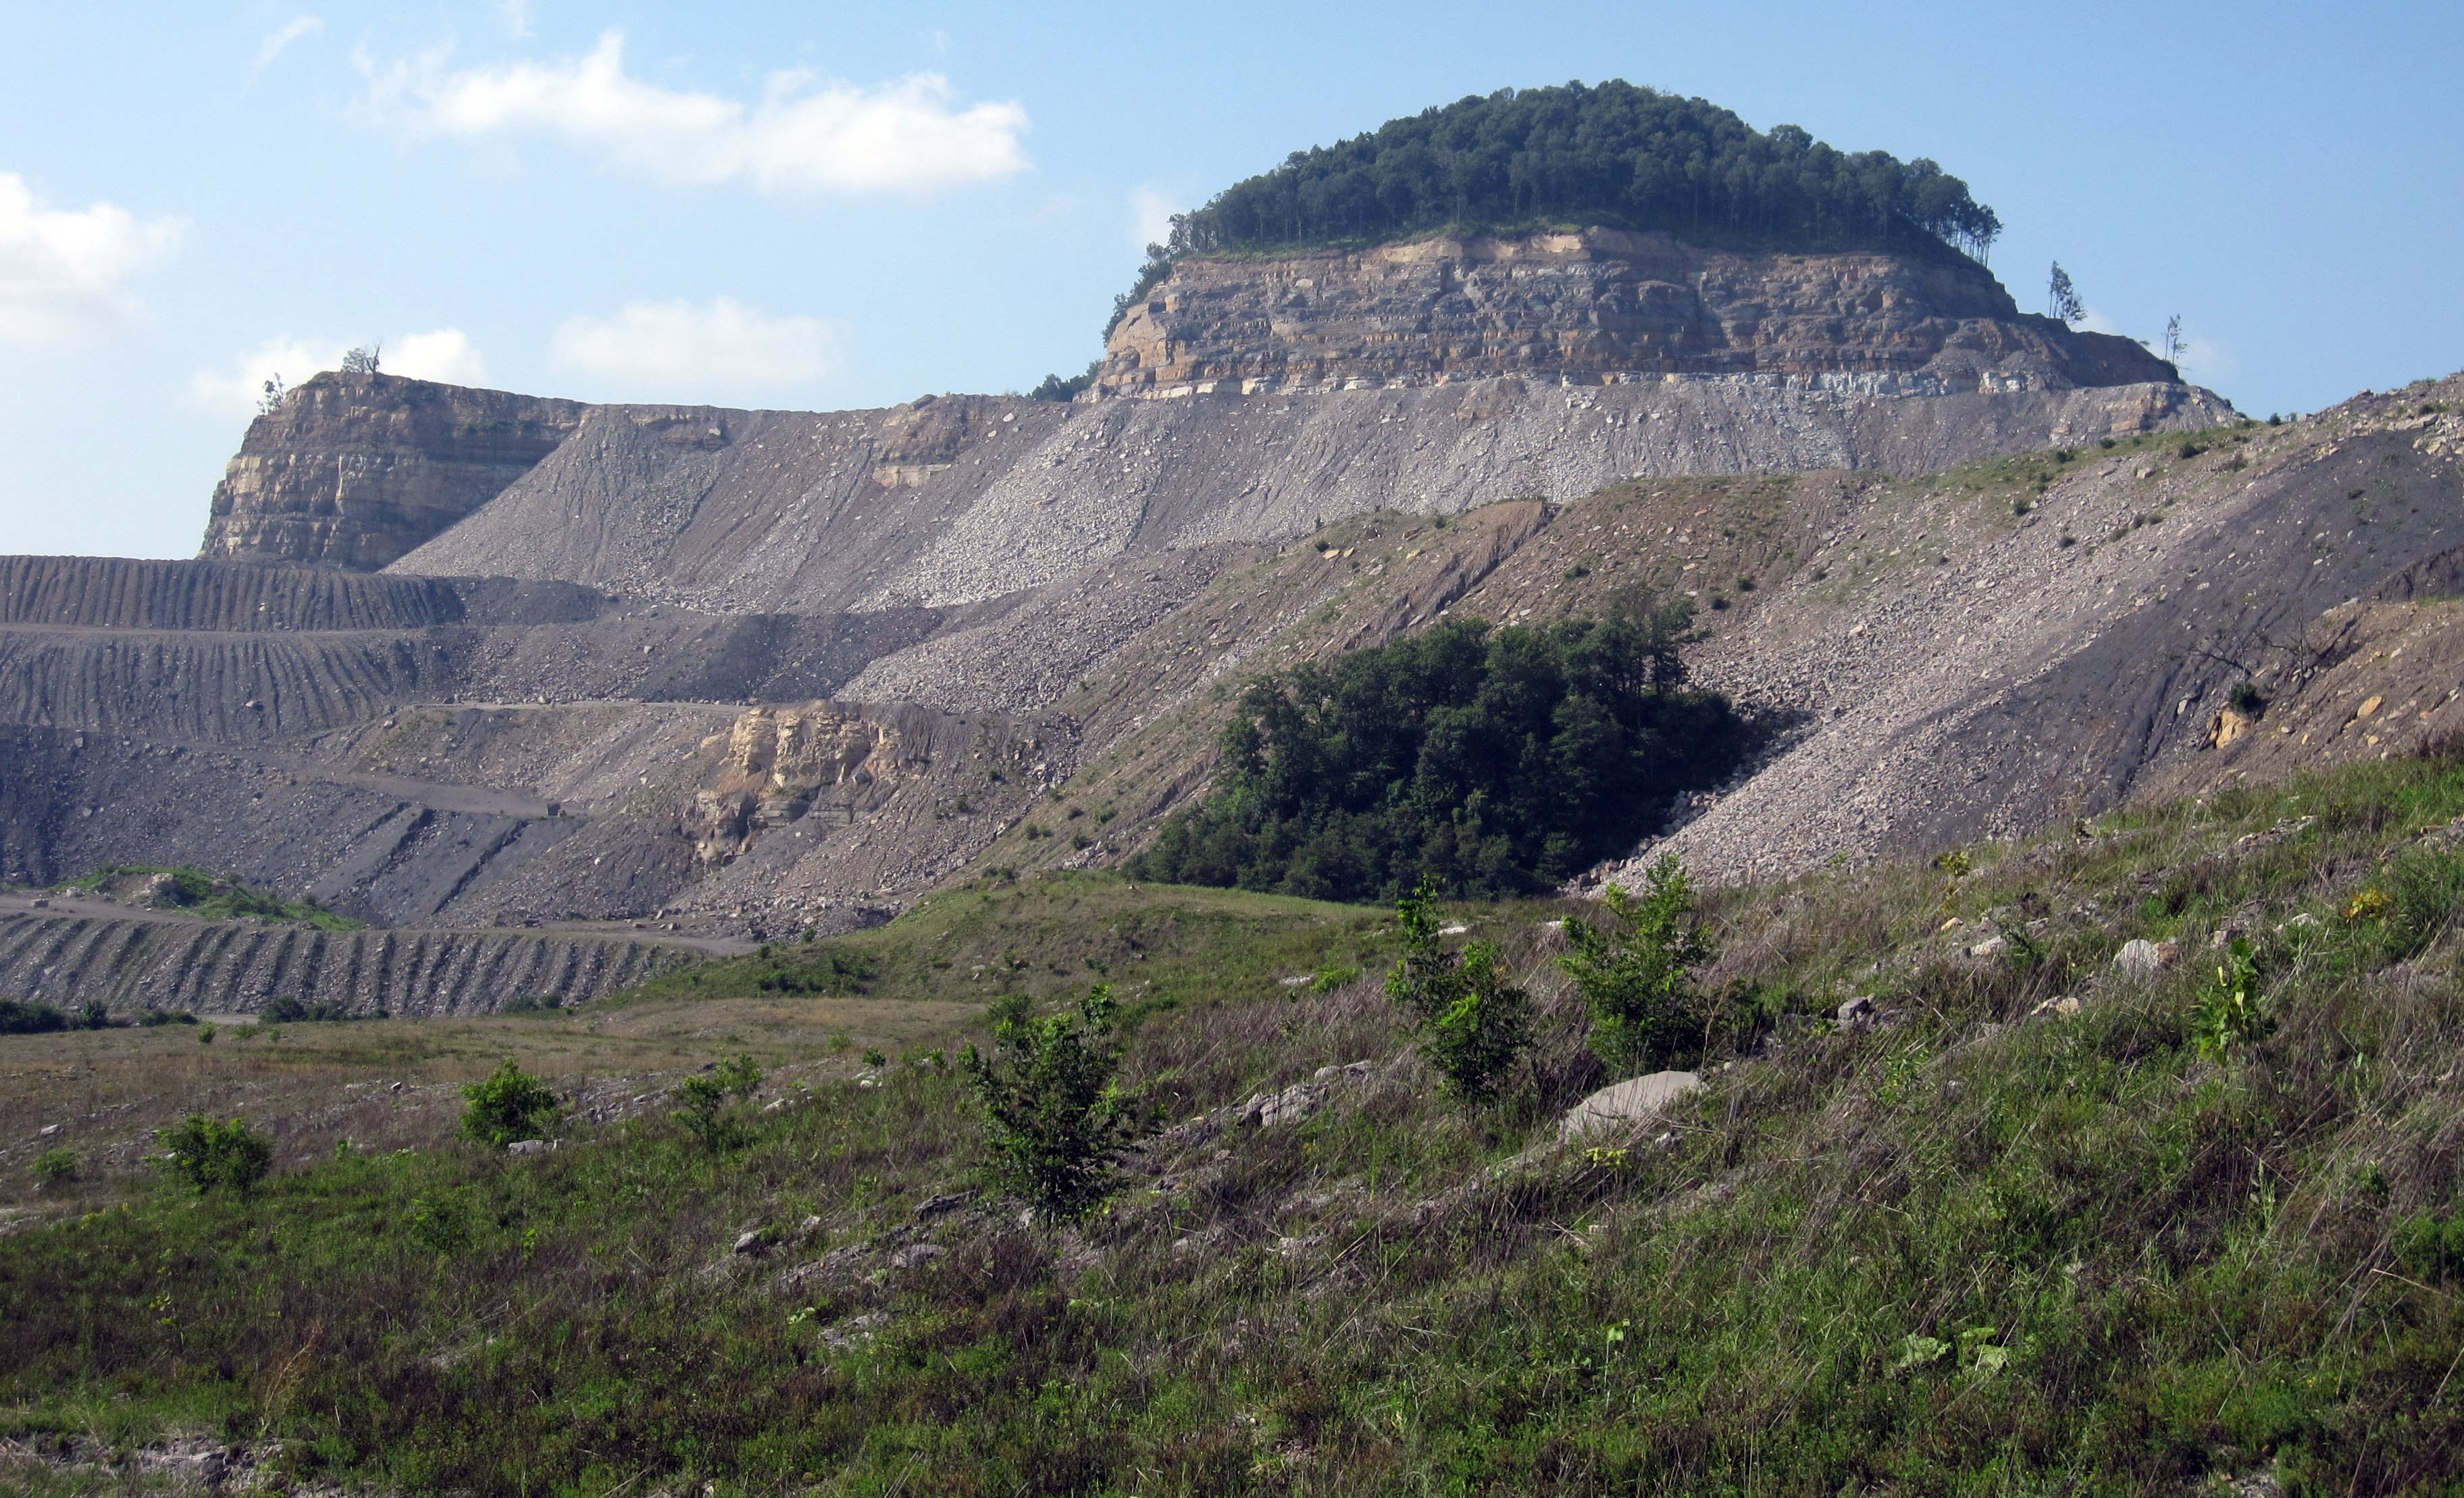 A mountaintop mining site, with a rocky outcrop topped with trees.